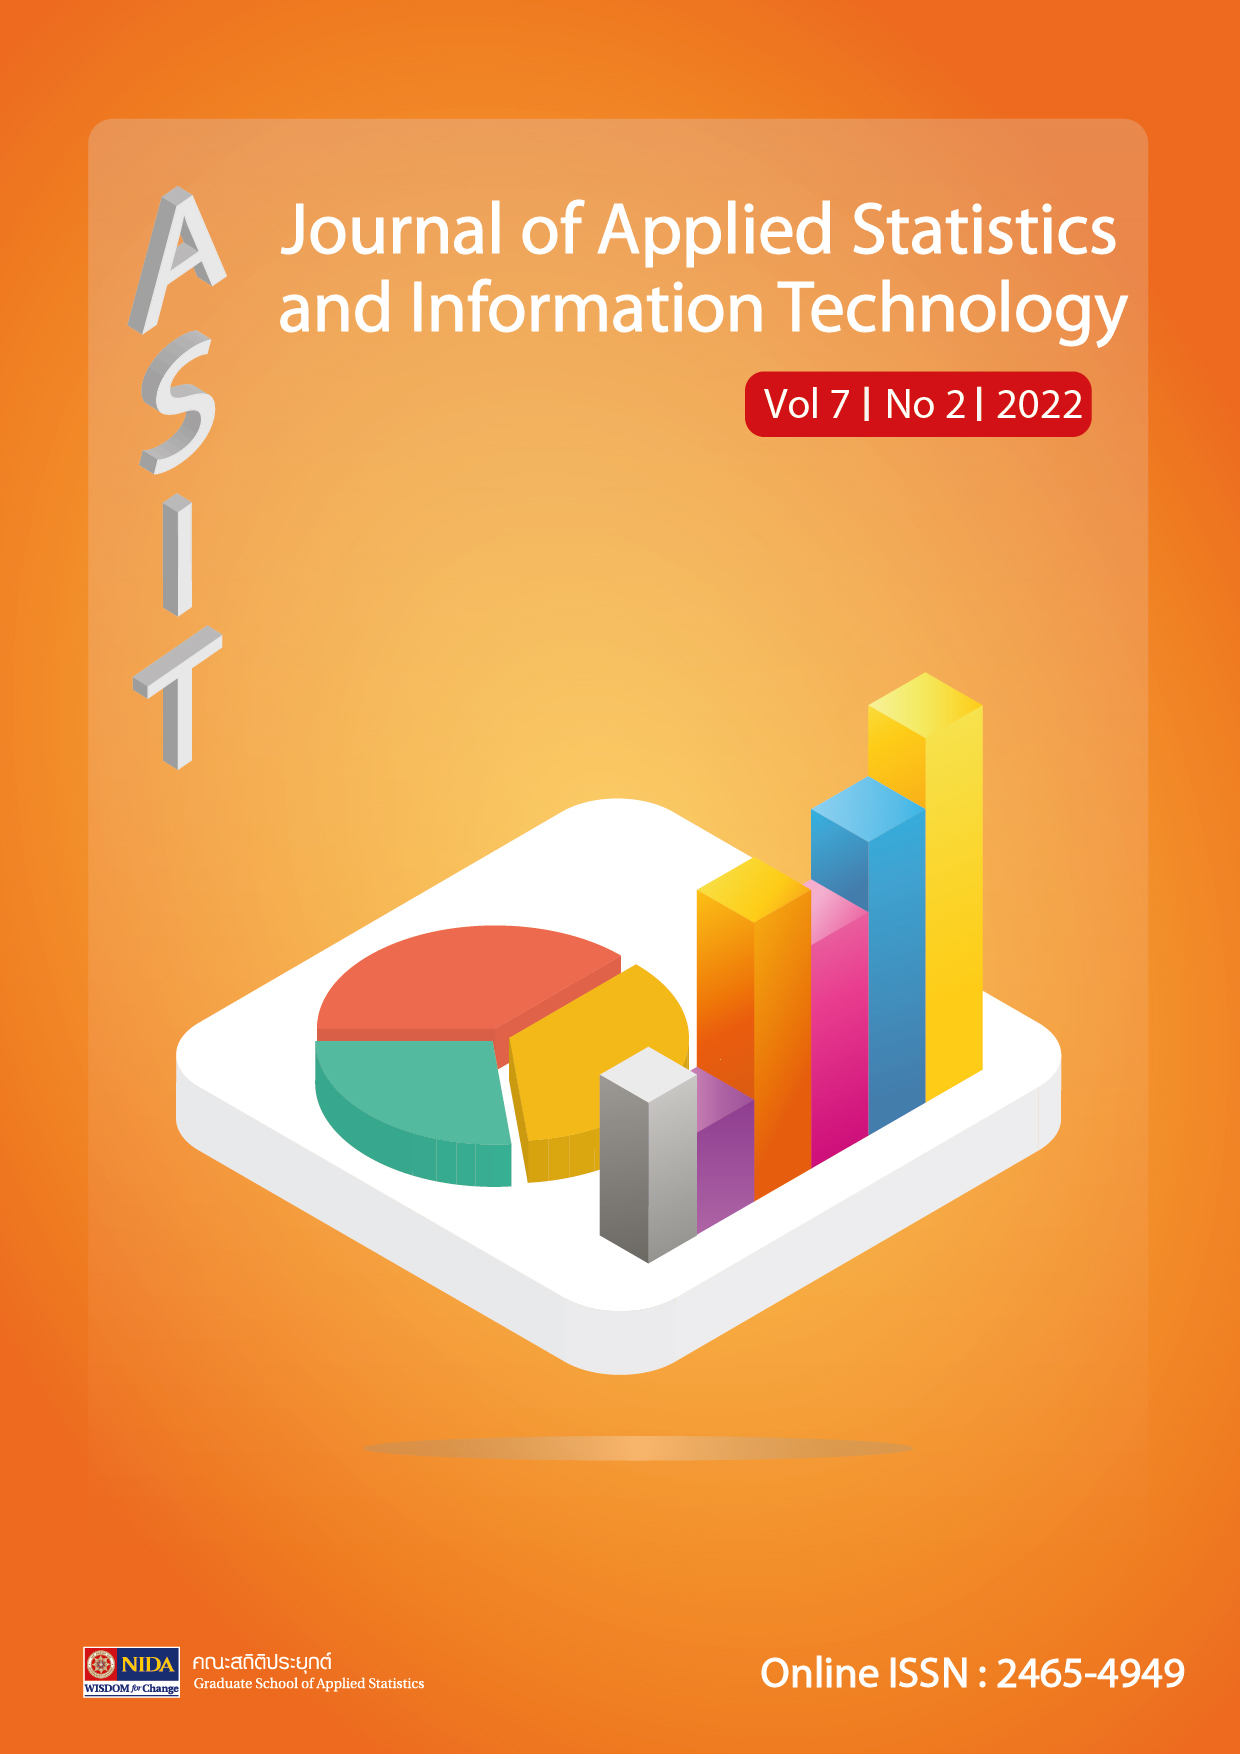 					View Vol. 7 No. 2 (2022): Journal of Applied Statistics and Information Technology Vol. 7 No. 2 (July - December 2022)
				